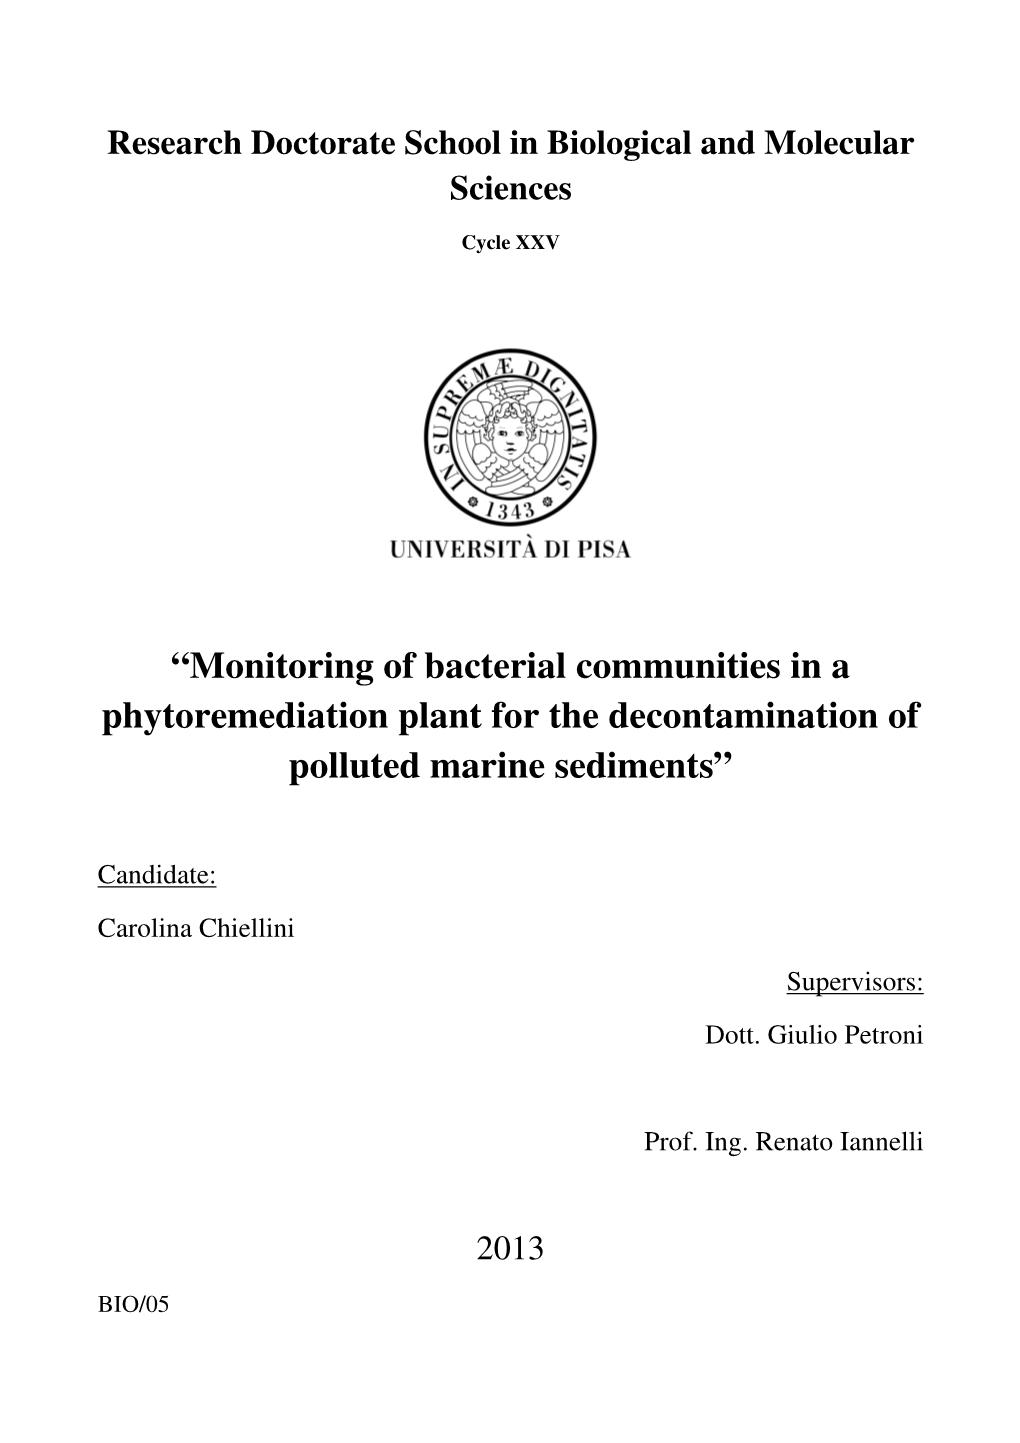 Monitoring of Bacterial Communities in a Phytoremediation Plant for the Decontamination of Polluted Marine Sediments”